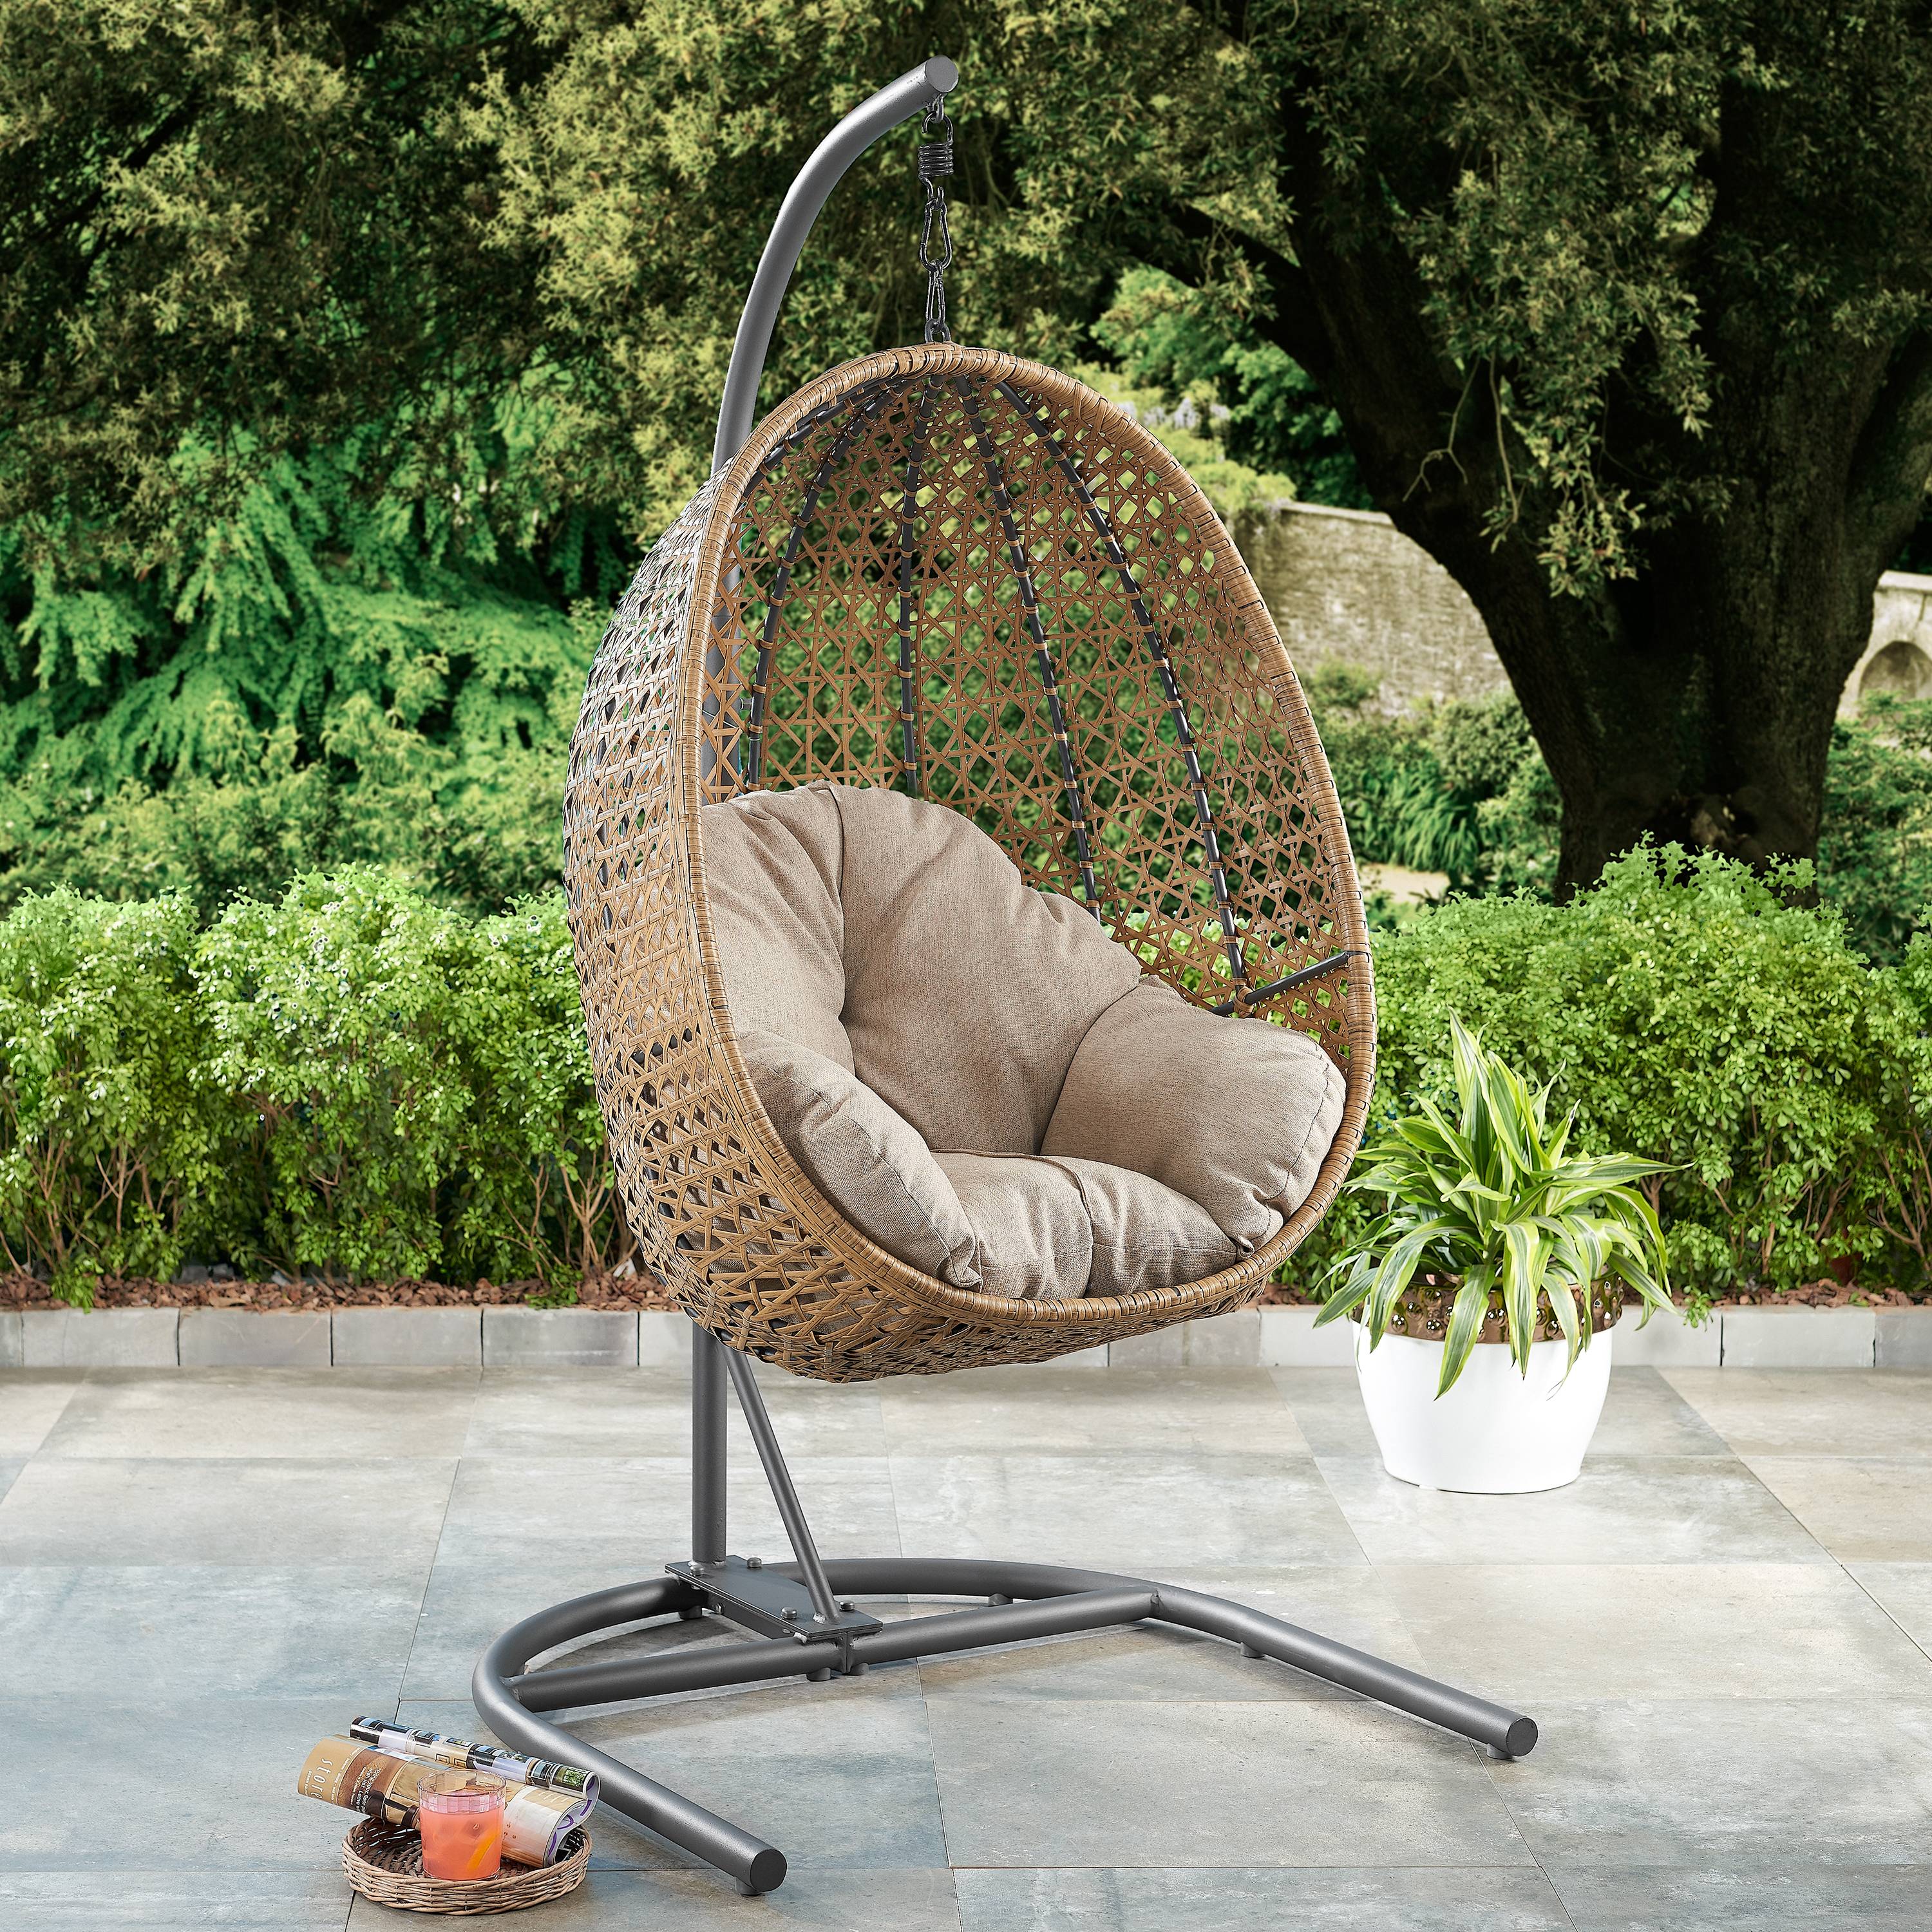 Better Homes & Gardens Outdoor Lantis Patio Hanging Egg Chair with Stand - Tan Wicker, Beige Cushion - image 4 of 5